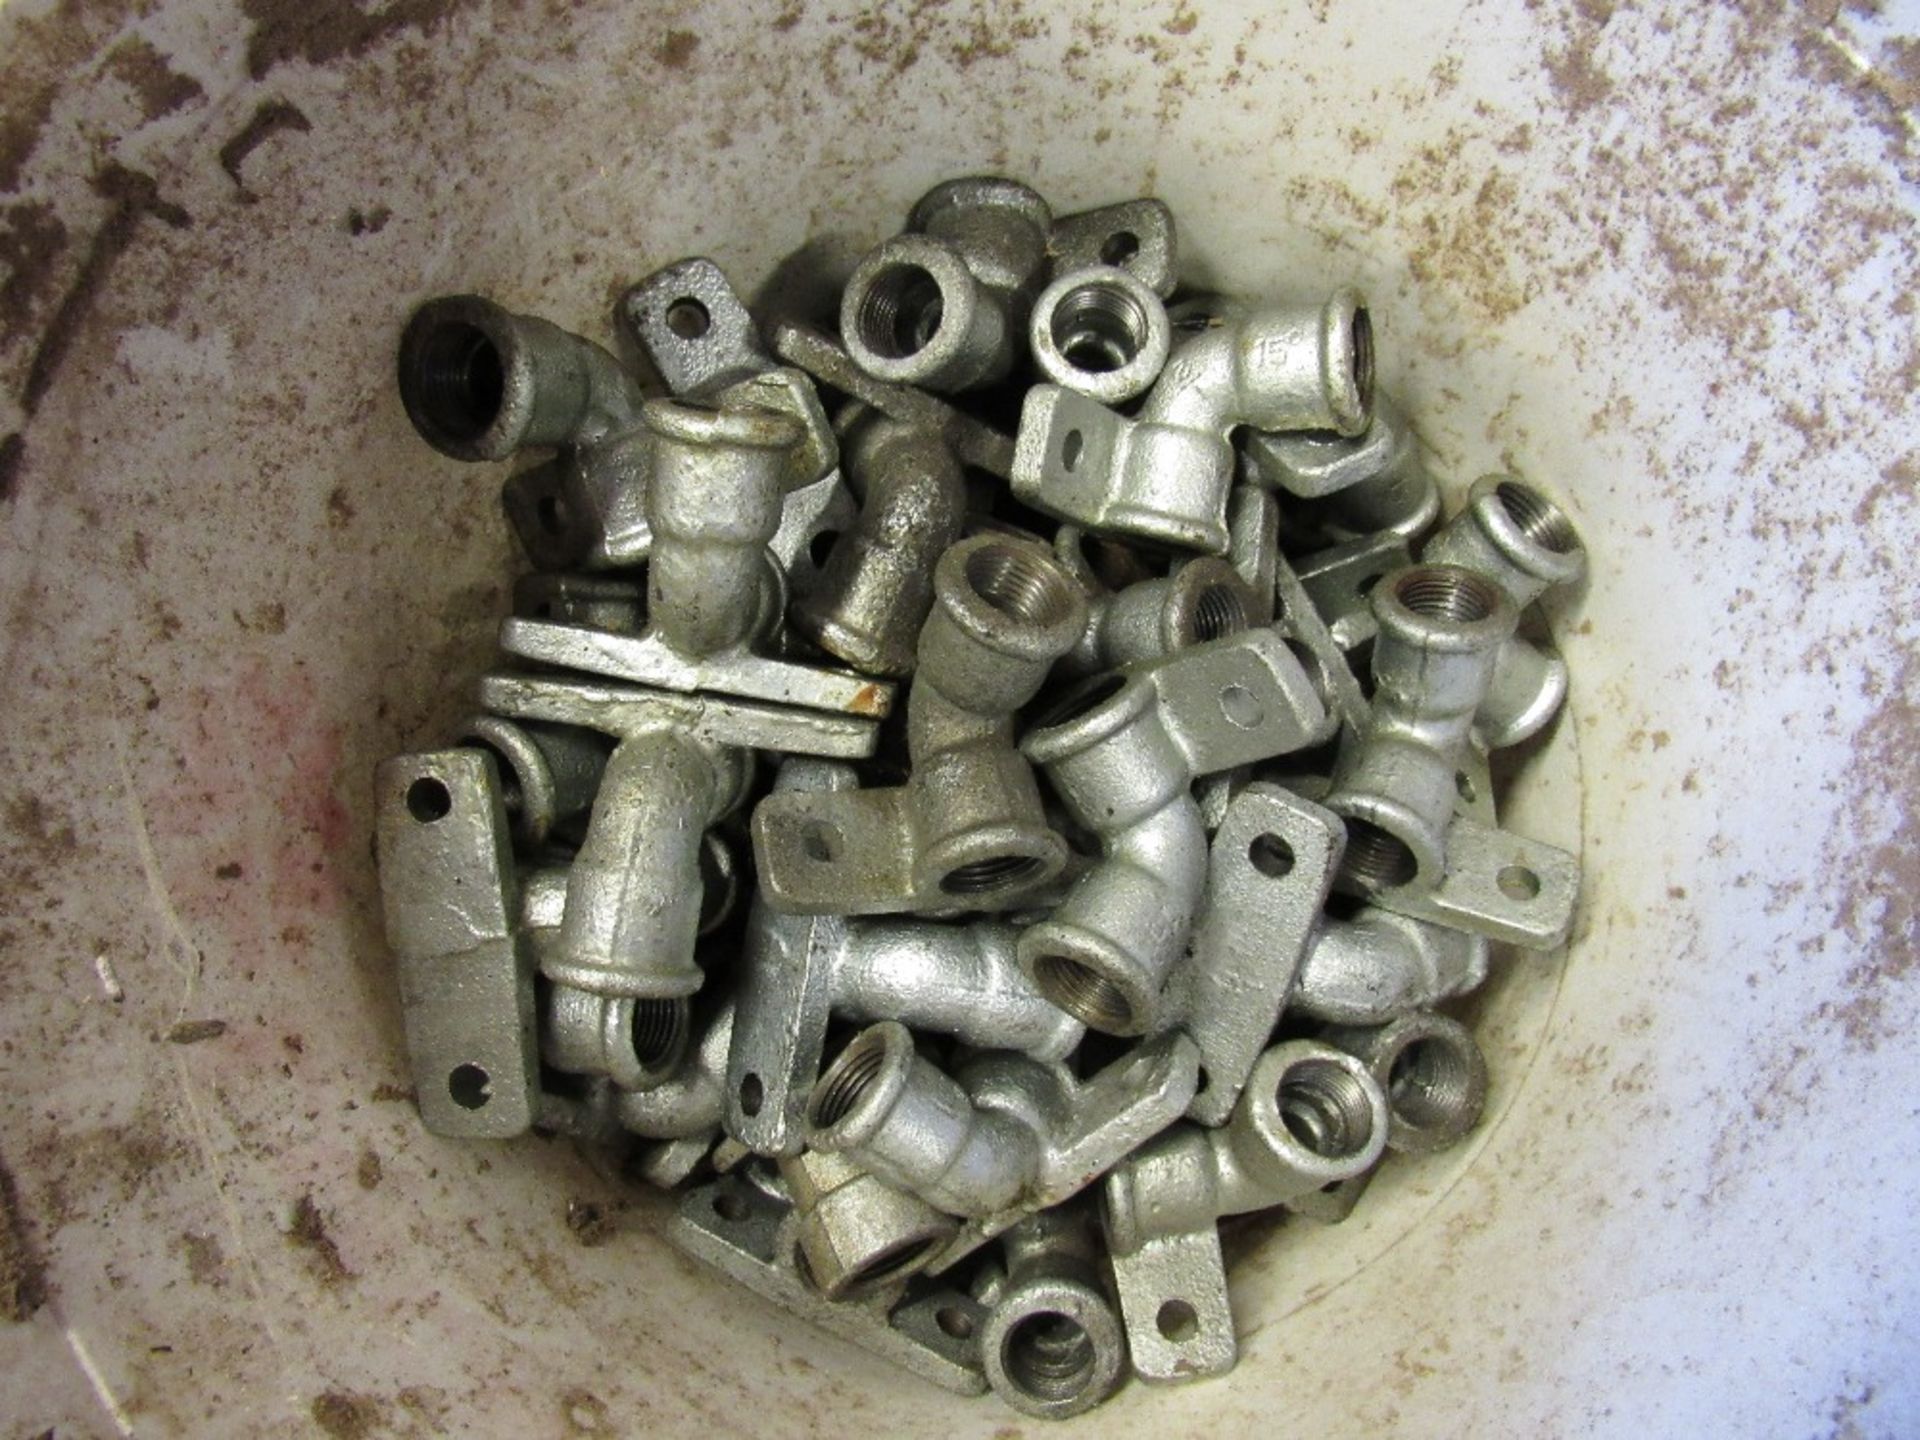 6 x Trays metal water fittings - Image 3 of 3